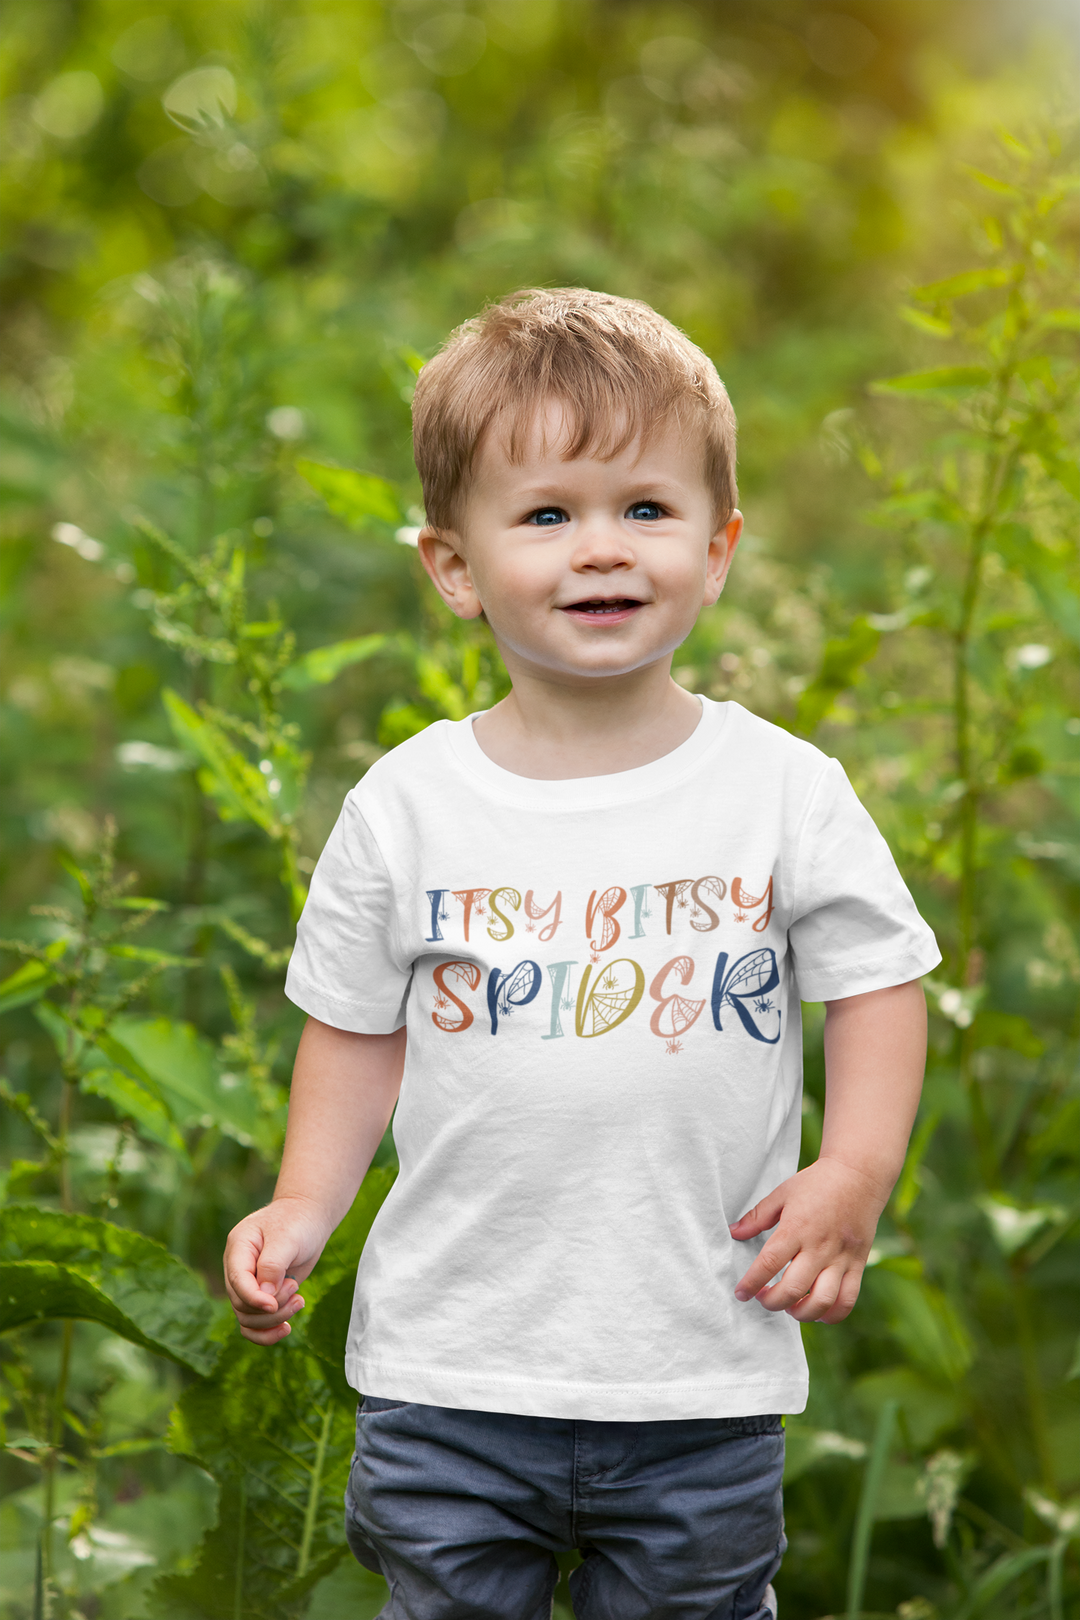 Itsy Bitsy Spider.          Halloween shirt toddler. Trick or treat shirt for toddlers. Spooky season. Fall shirt kids.